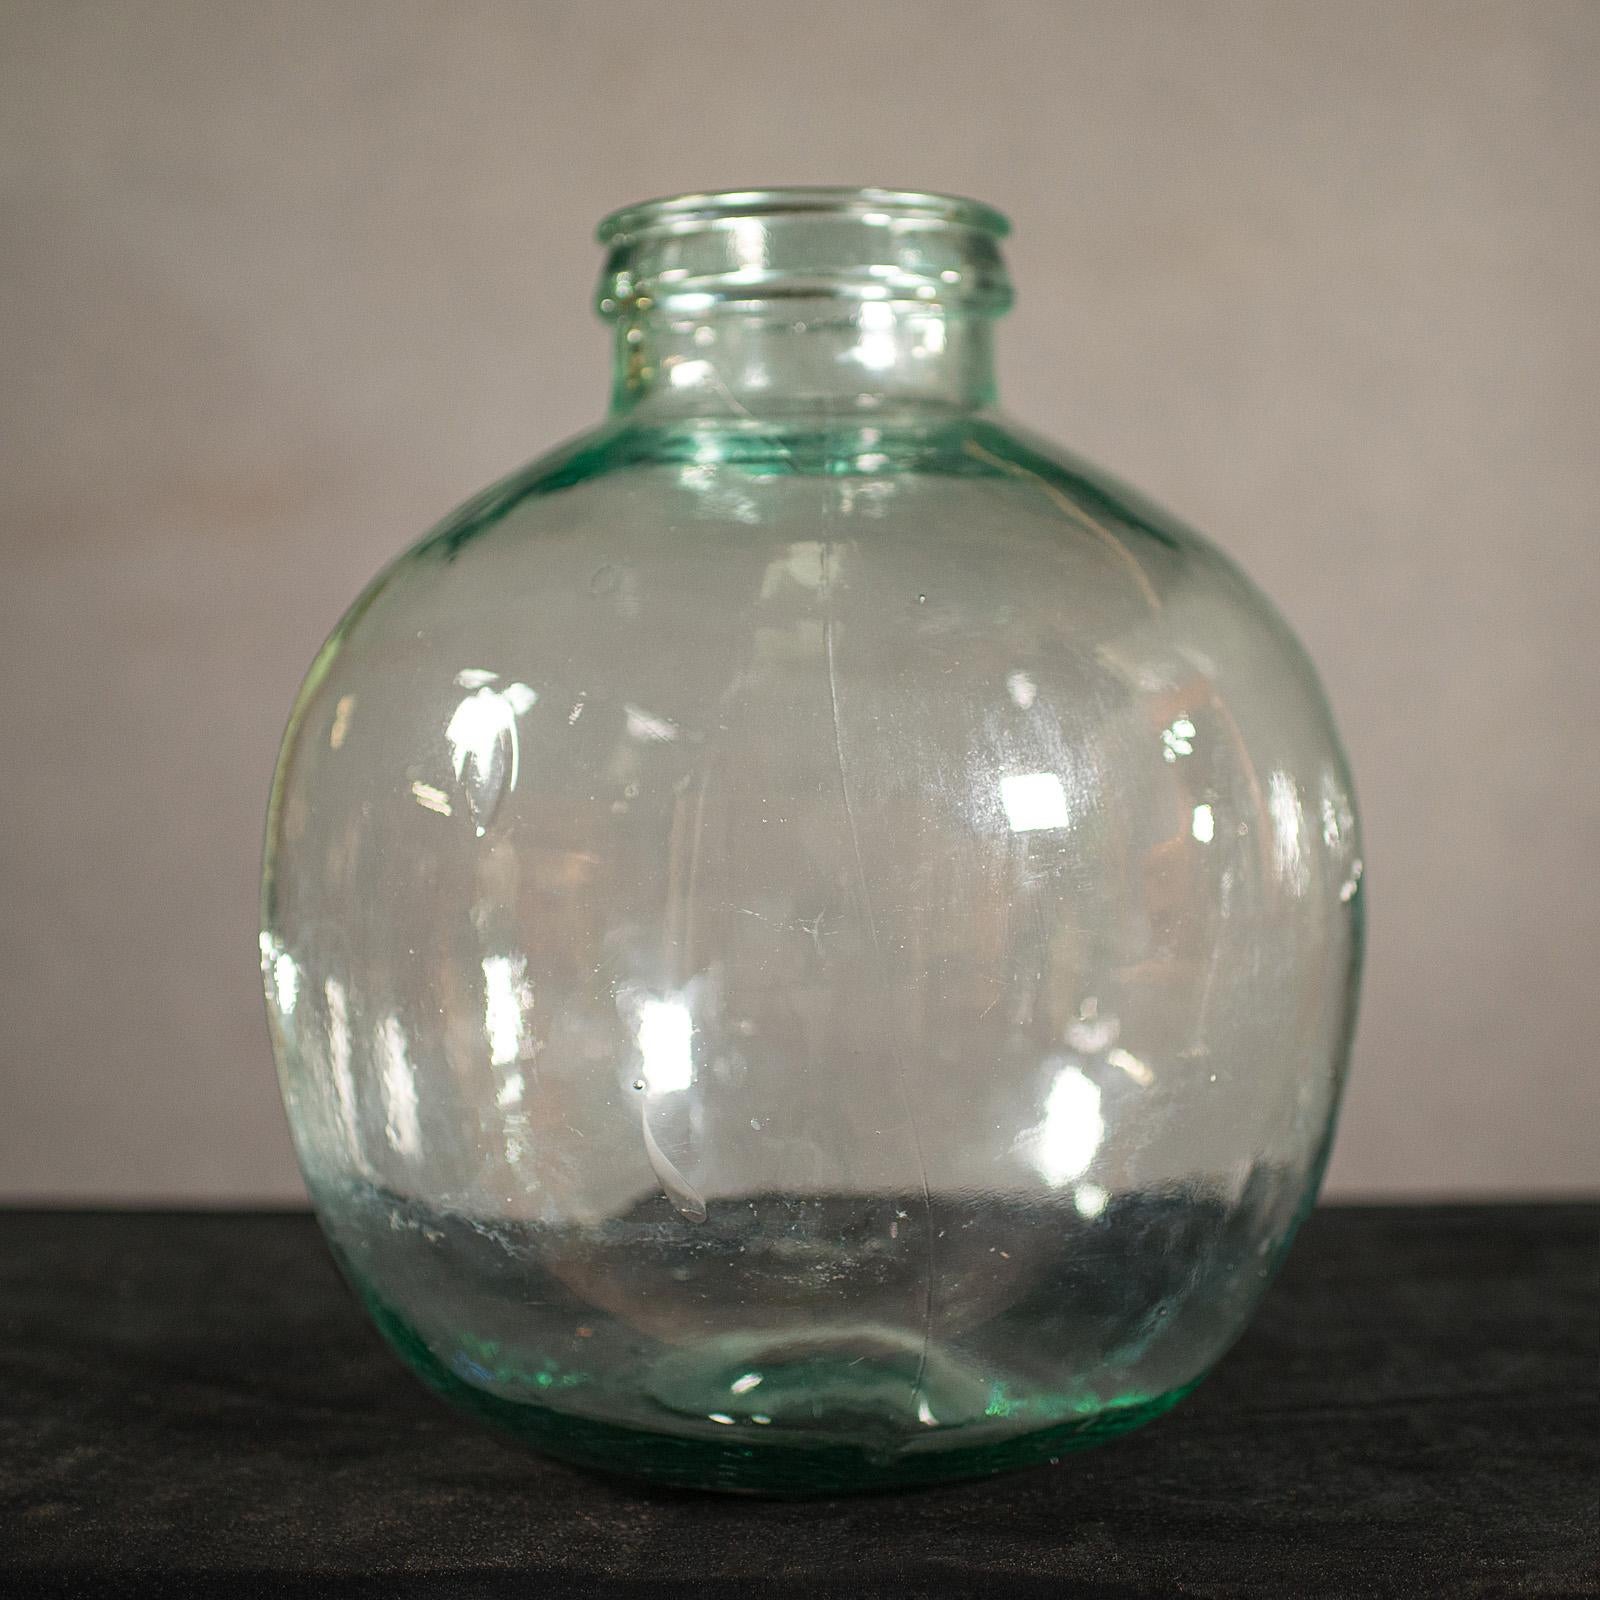 This is a large antique carboy. An English, glass storage jar or terrarium, dating to the late Victorian period, circa 1900.

Generously sized with charming antique glass and pleasing colour
Displays a desirable aged patina with some visible blowing